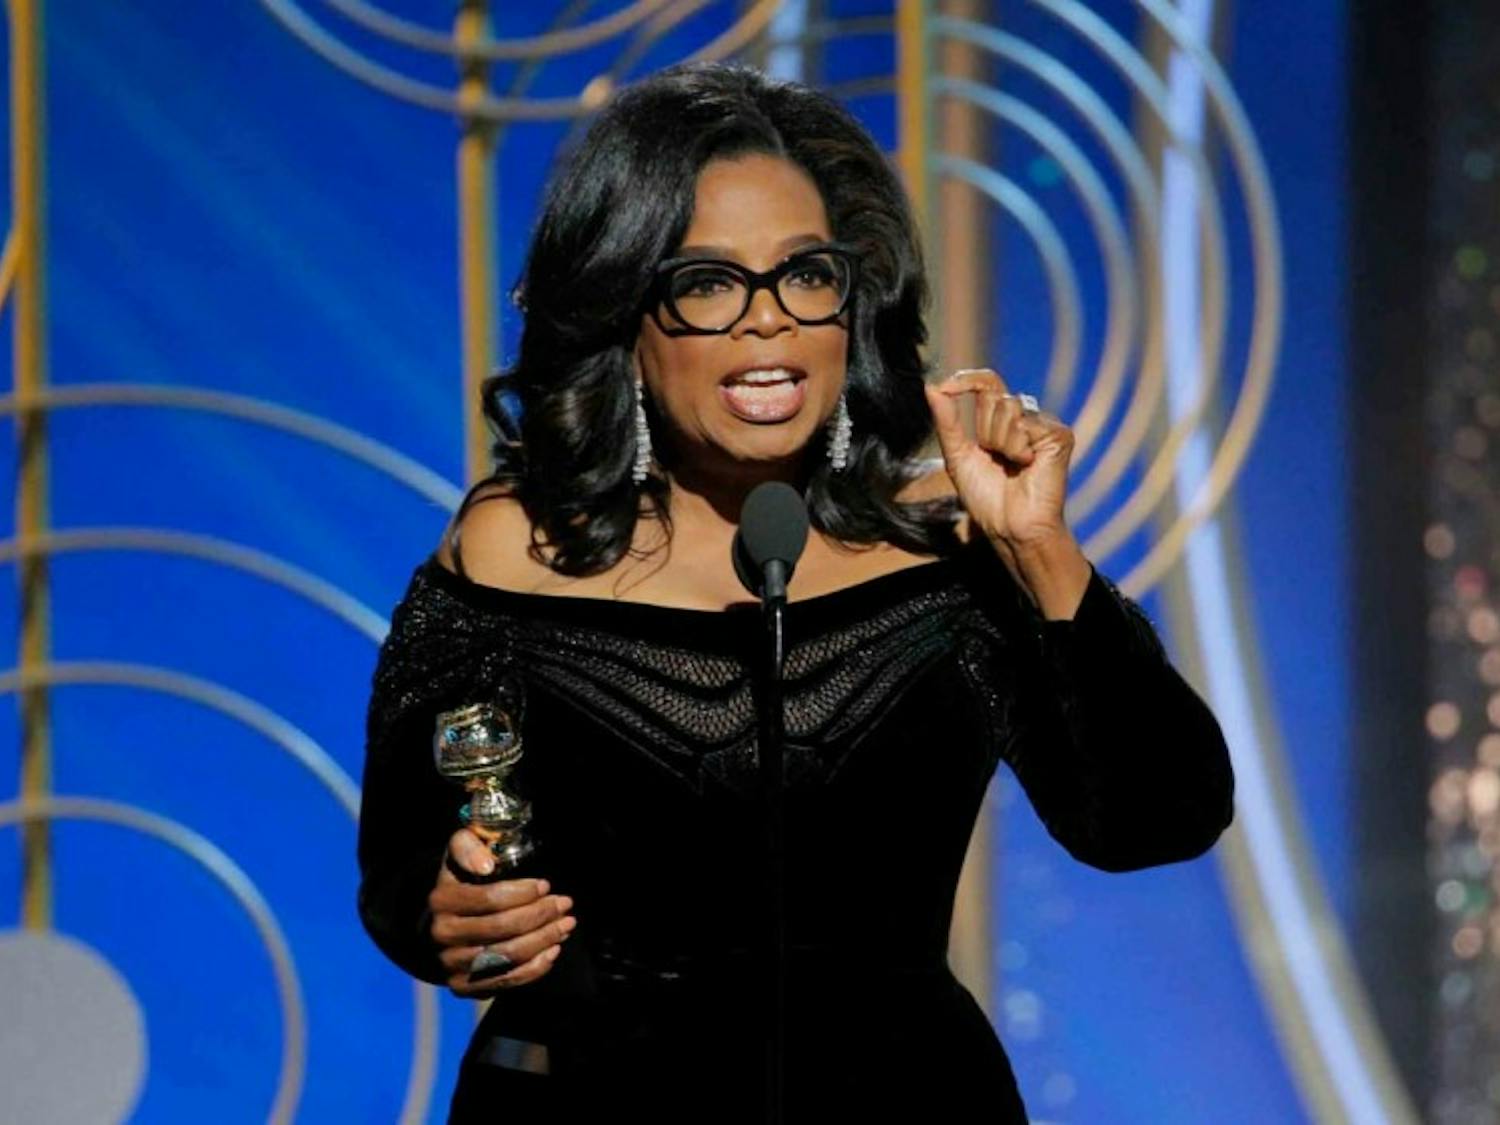 Oprah Winfrey's groundbreaking&nbsp;acceptance speech for the Cecil B. DeMille award has already sparked discussion over a presidential campaign in 2020.